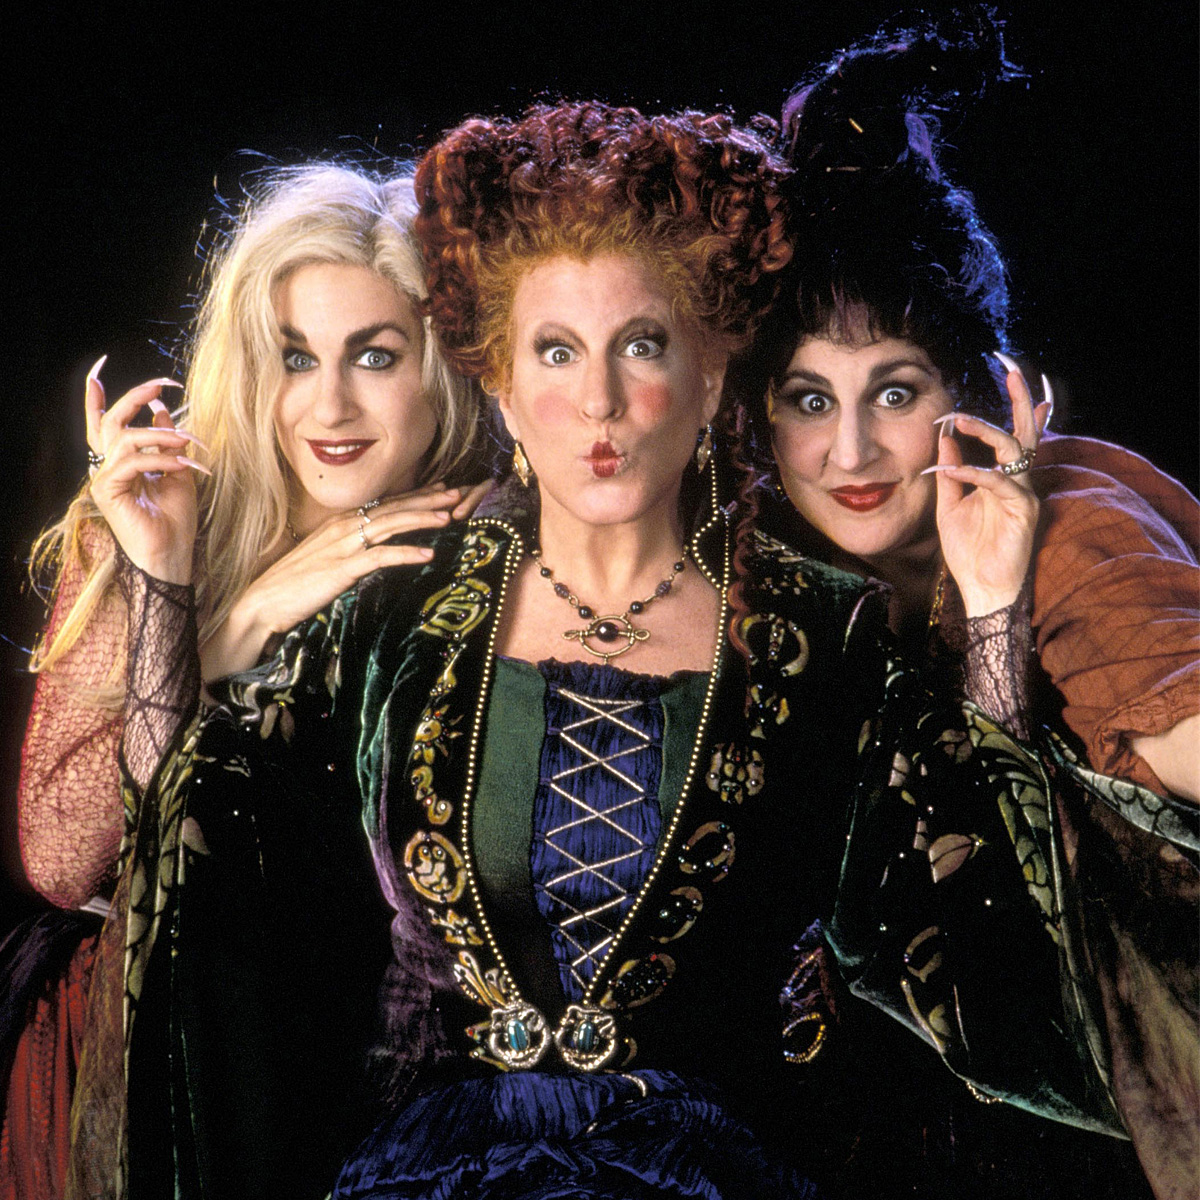 We've Been Quoting Hocus Pocus Incorrectly This Whole Time